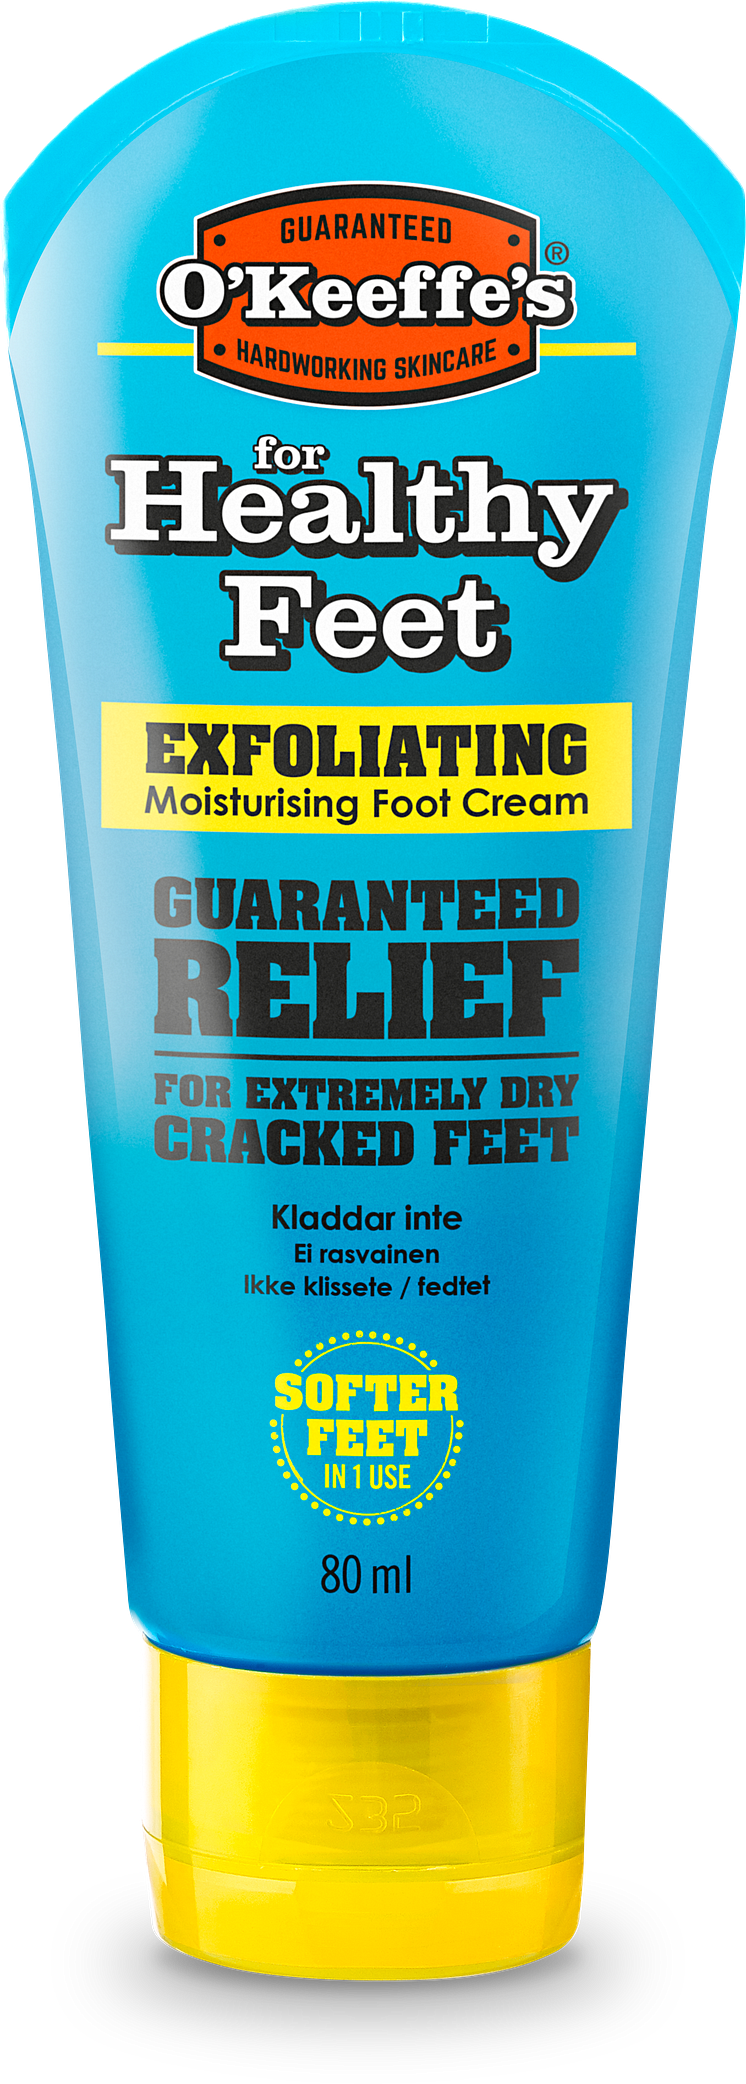 OKeeffes Healthy Feet Exfoliating.png